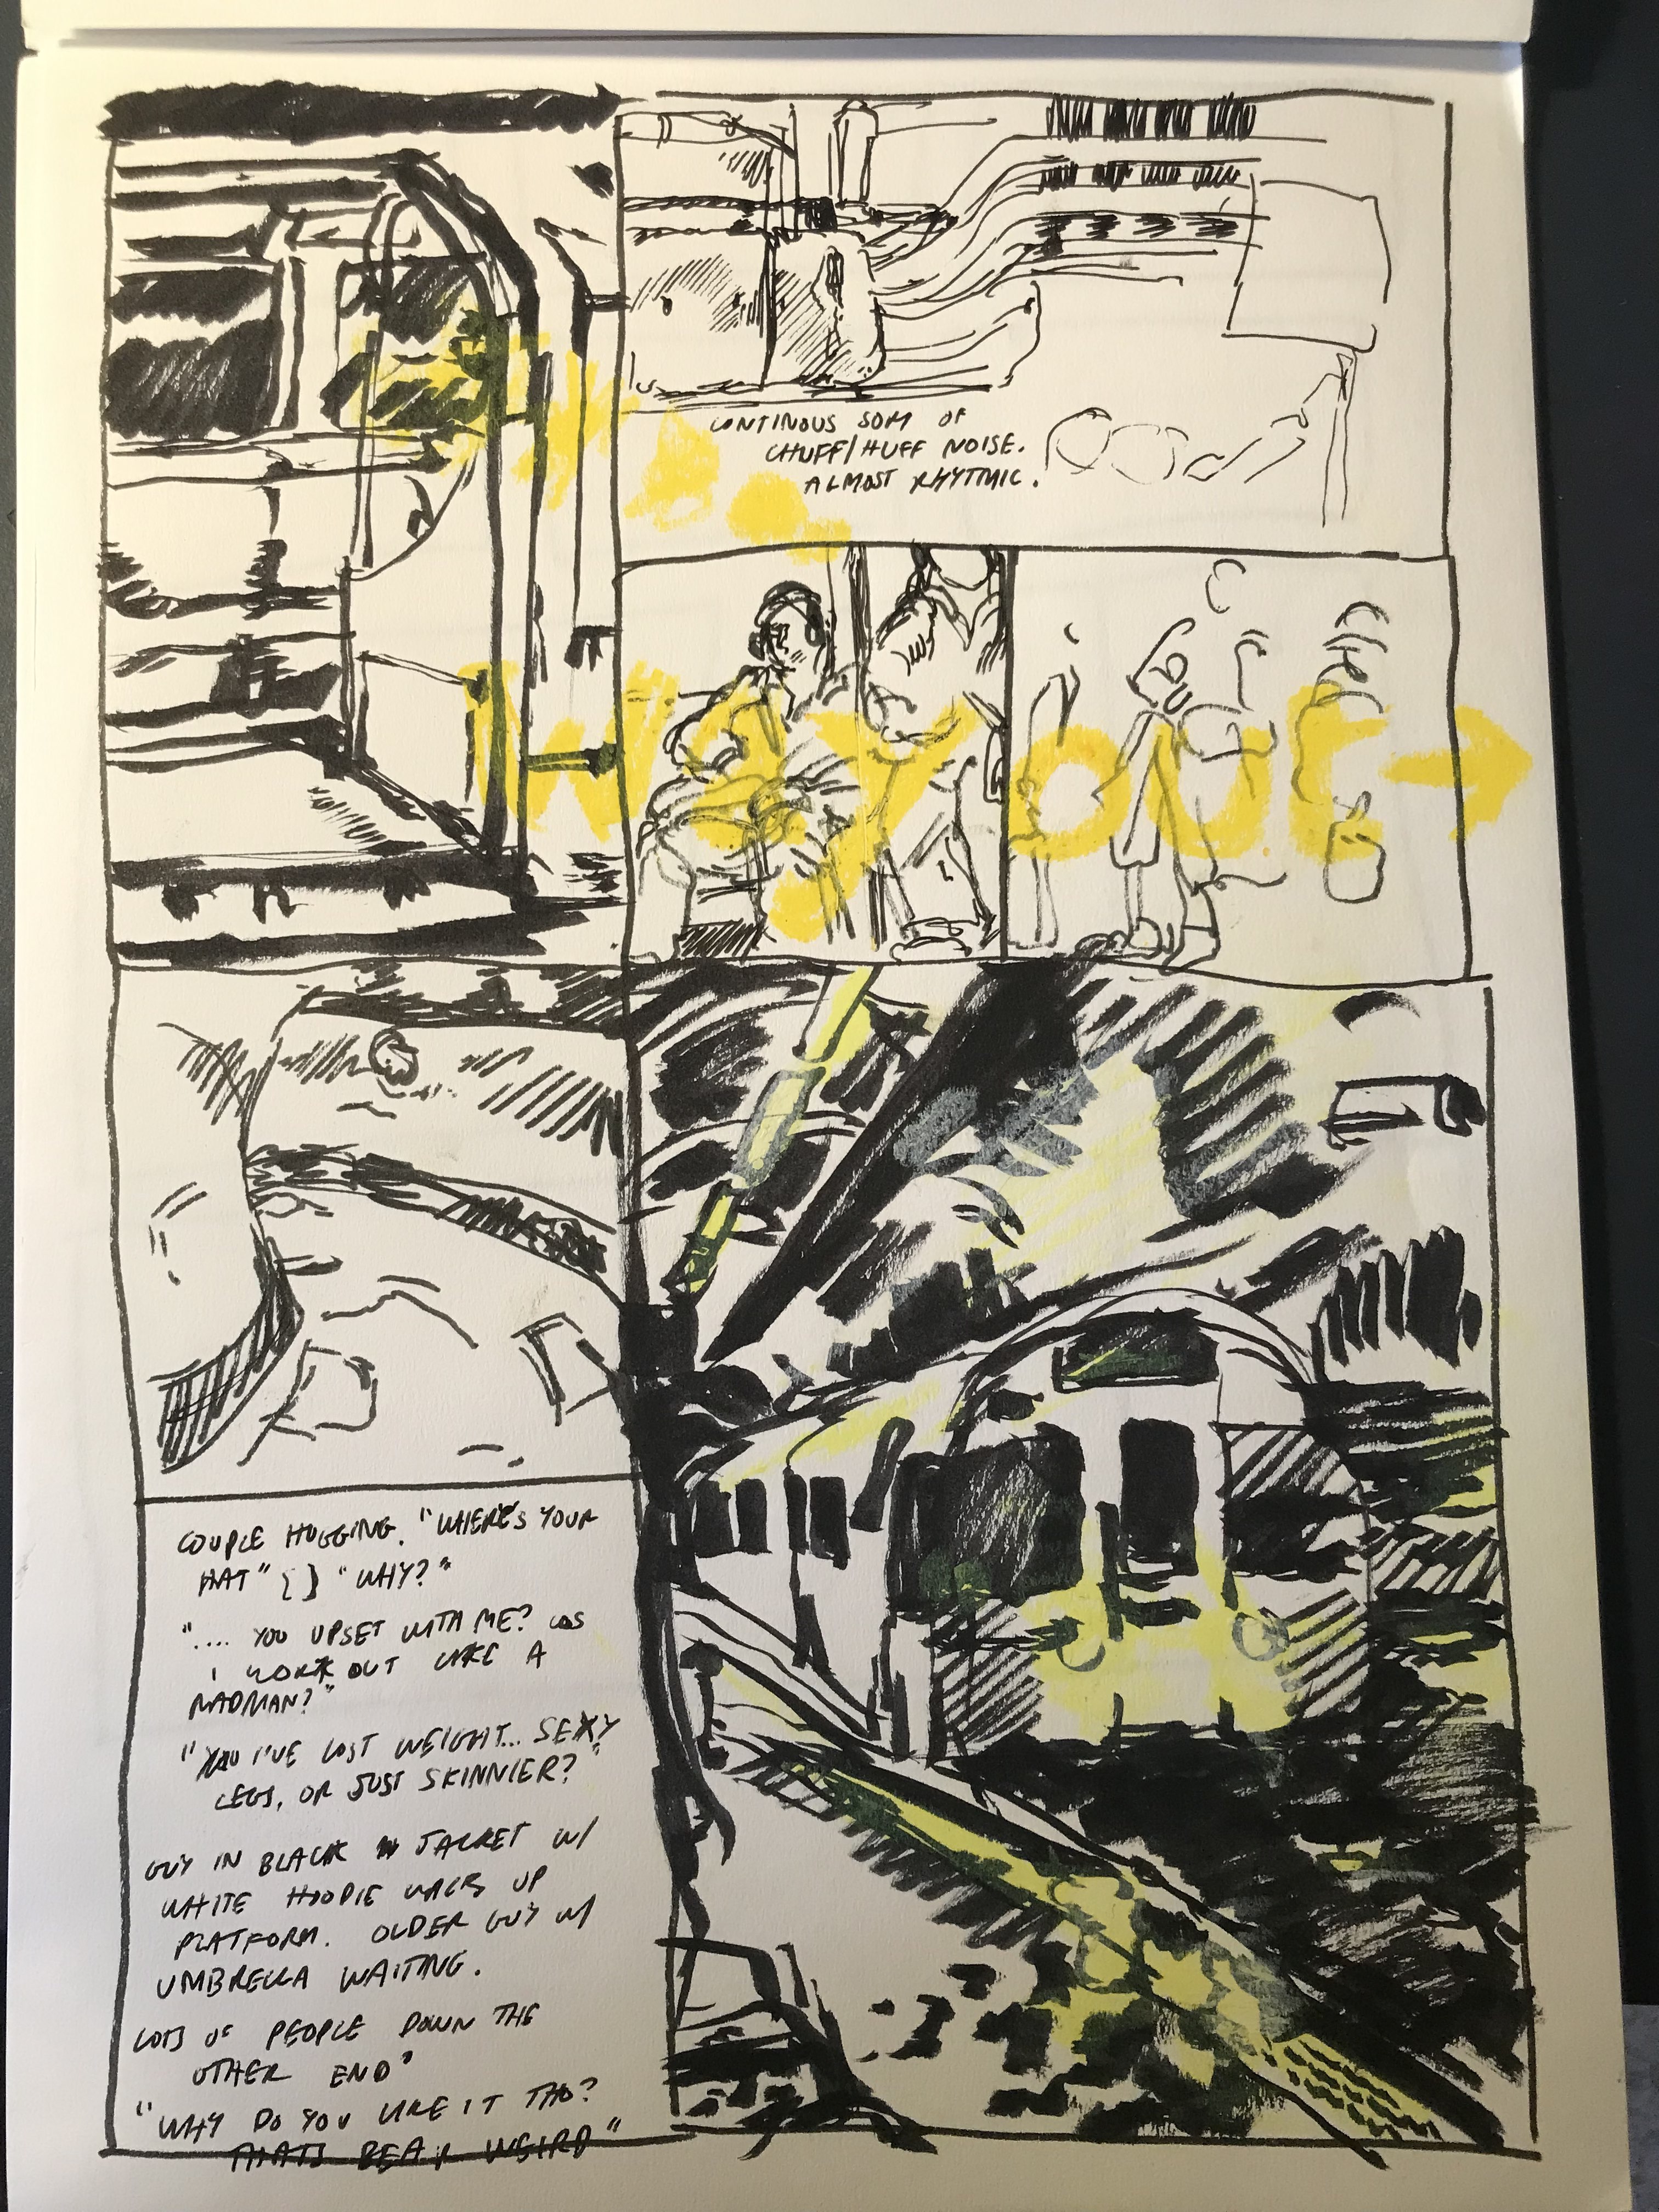 A page split up into various panels, each containing sketches in black brush pen and yellow oil pastel of people on the train and train platform, and trains.